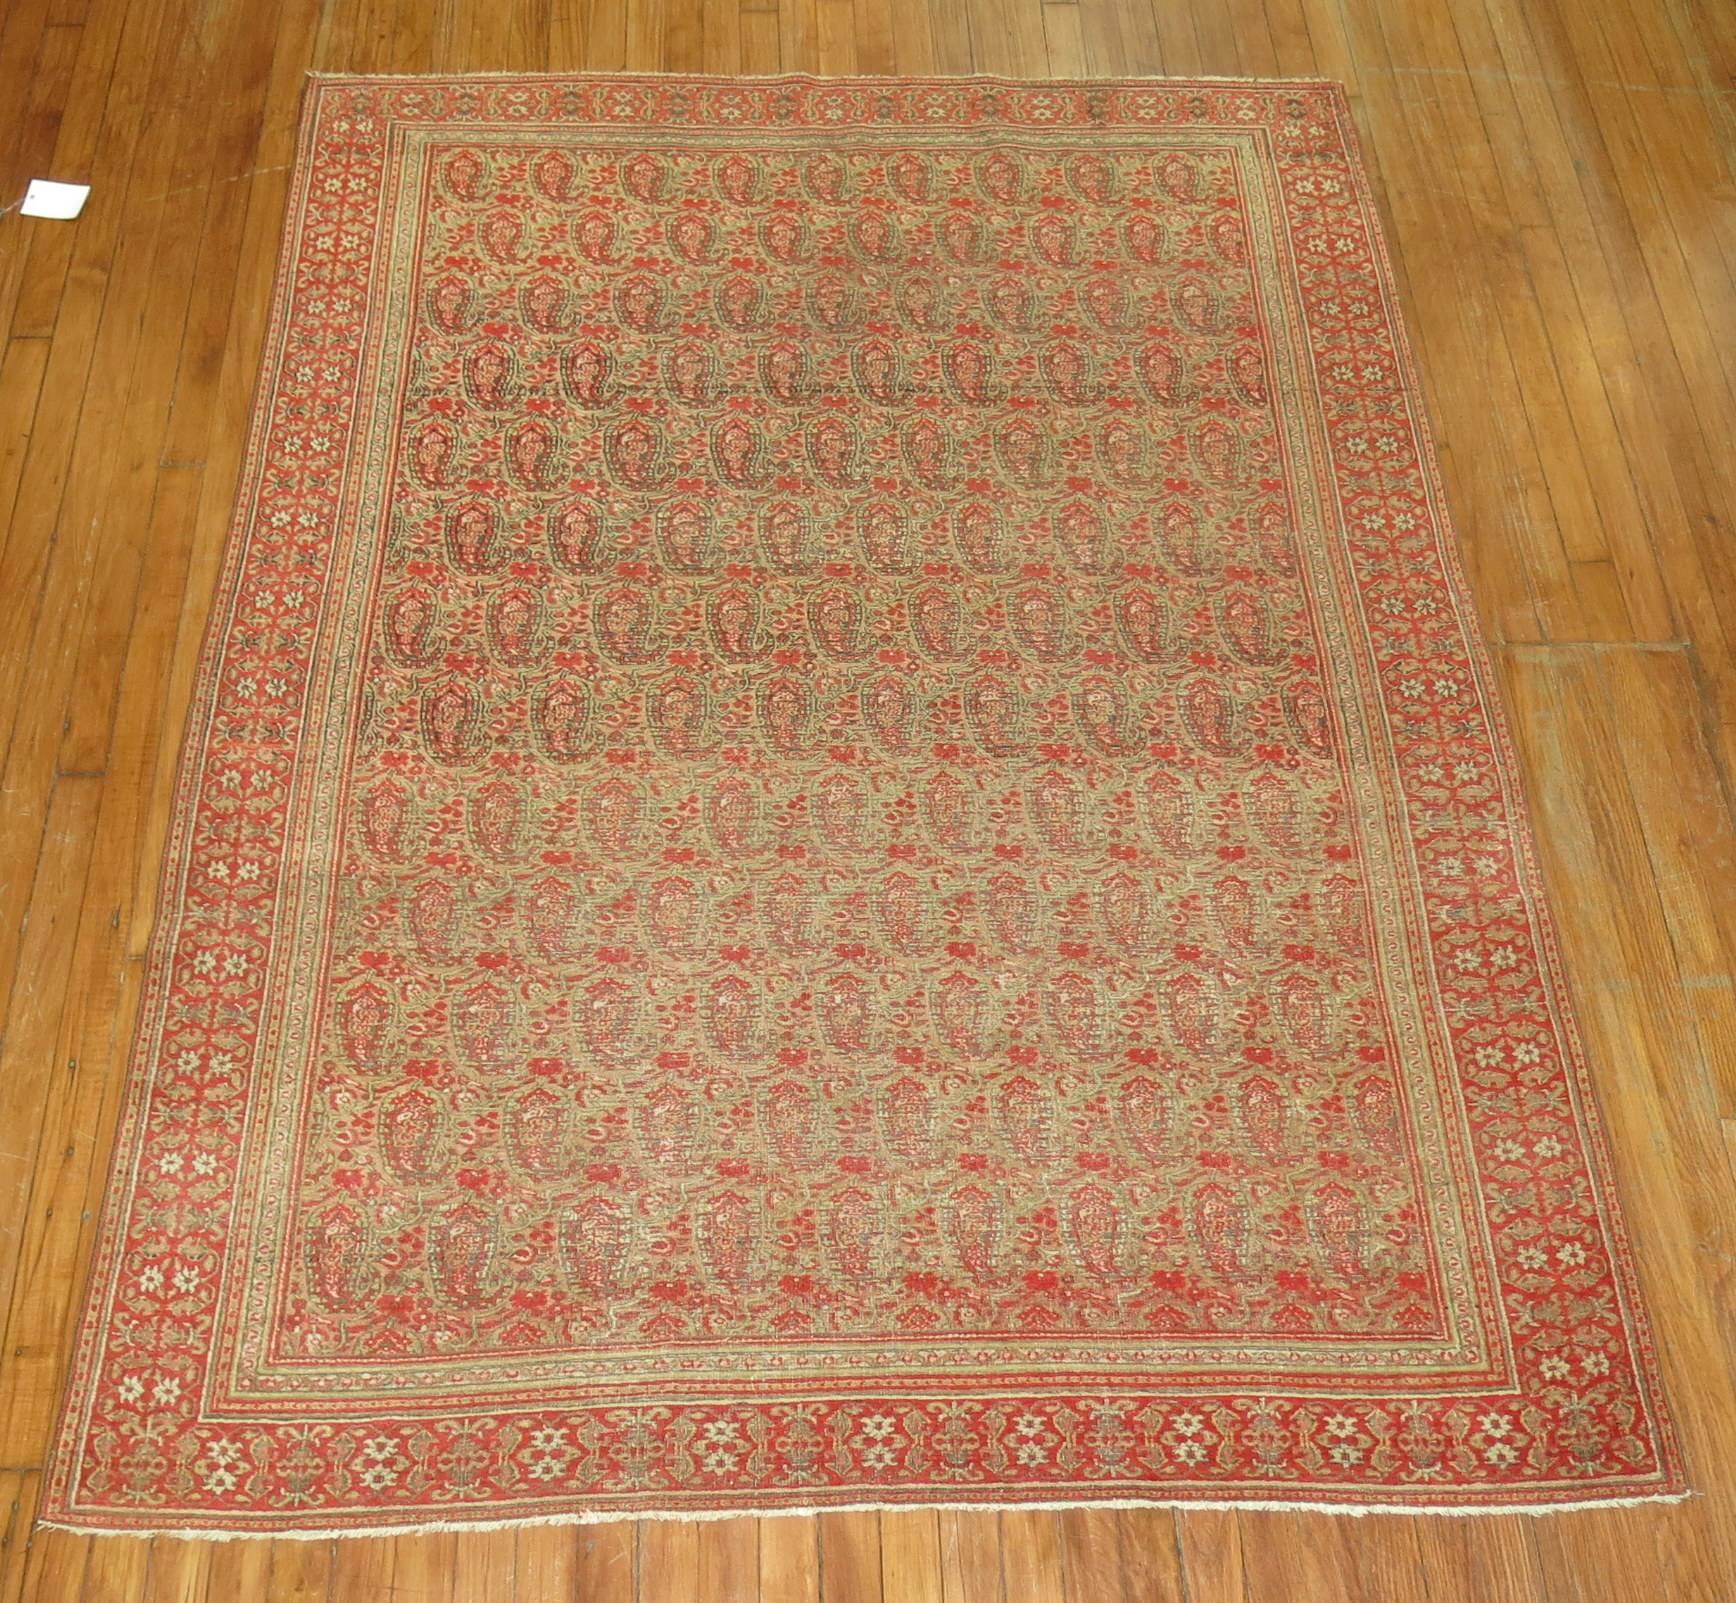 An illustrious dorokhsh rug with an inspiring all-over boteh design with shades of cinnamon and cocoa browns. Close-up images more accurate in color than overall photo.

Measures: 5'3'' x 7'1''.

